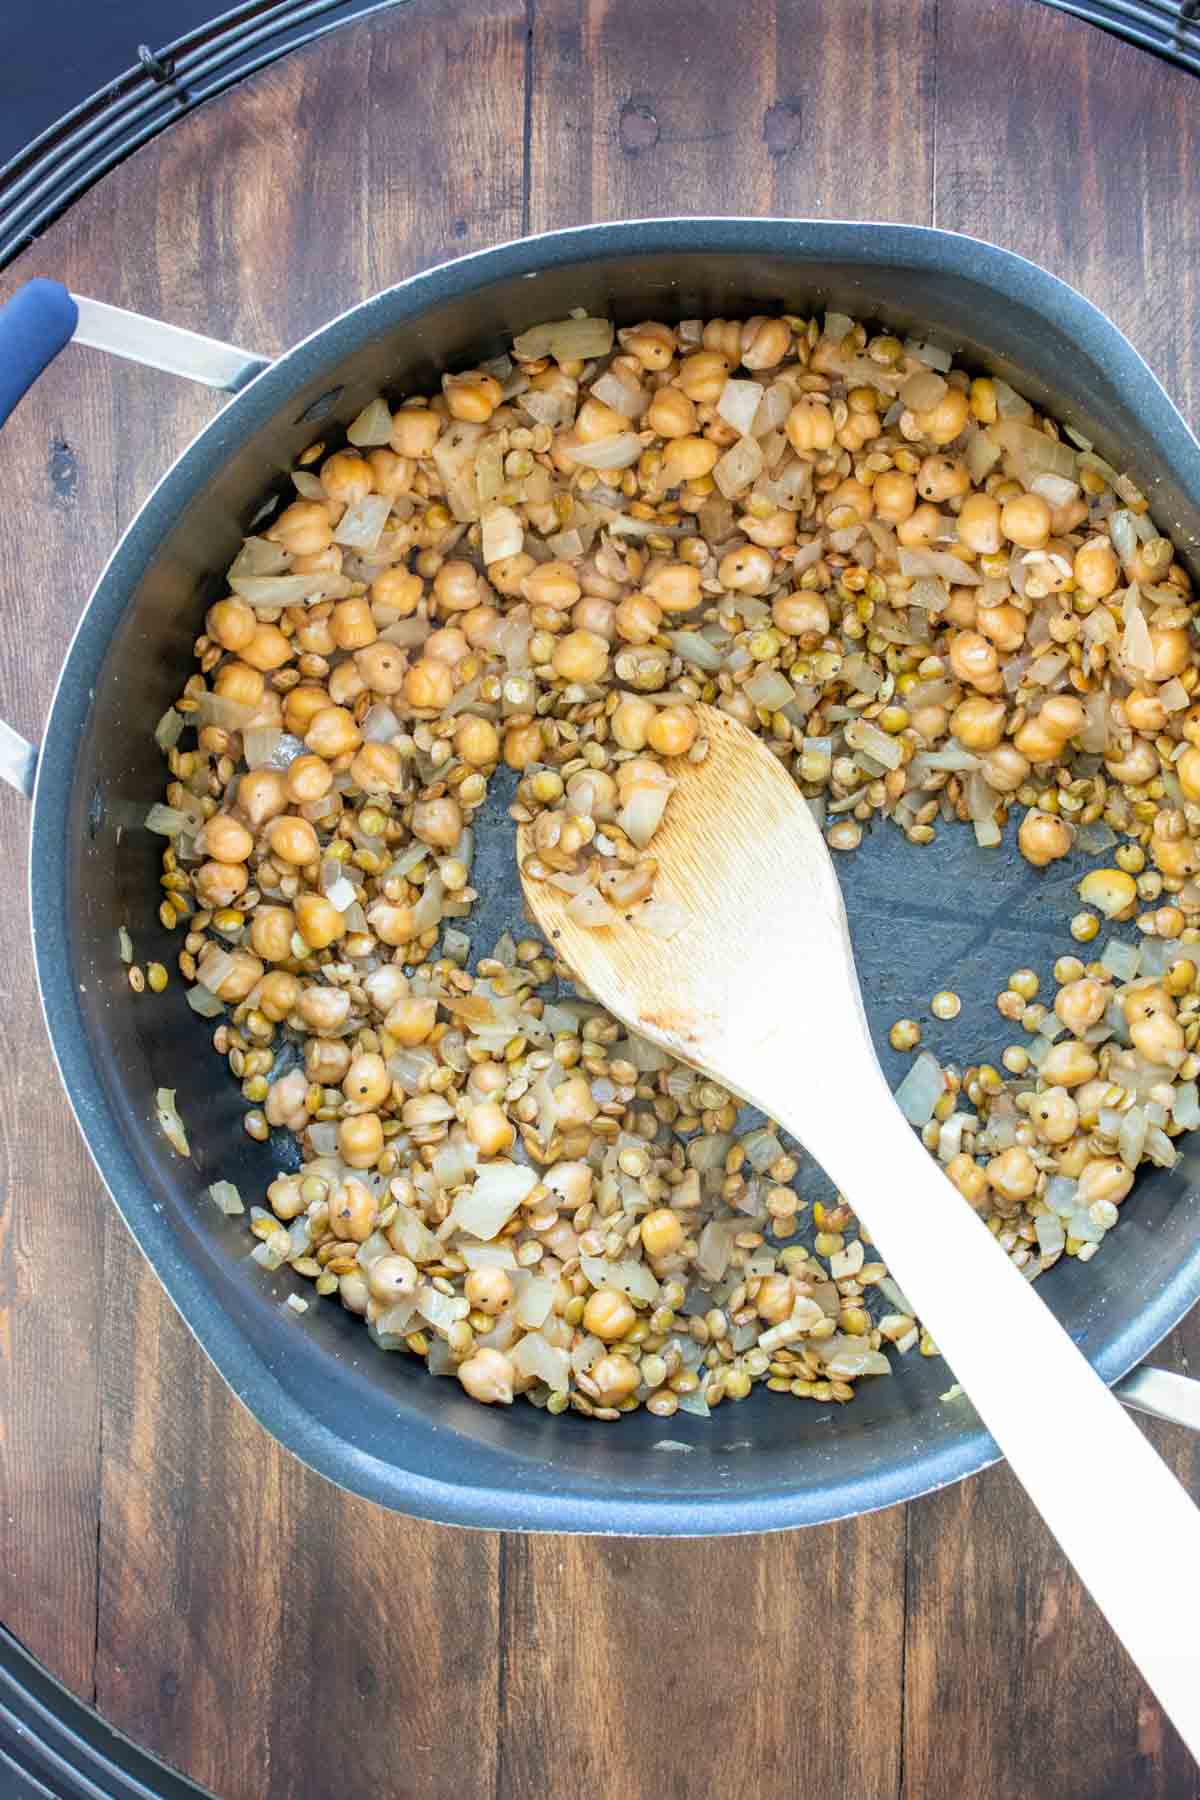 Wooden spoon mixing chickpeas, lentils and onions in a pot